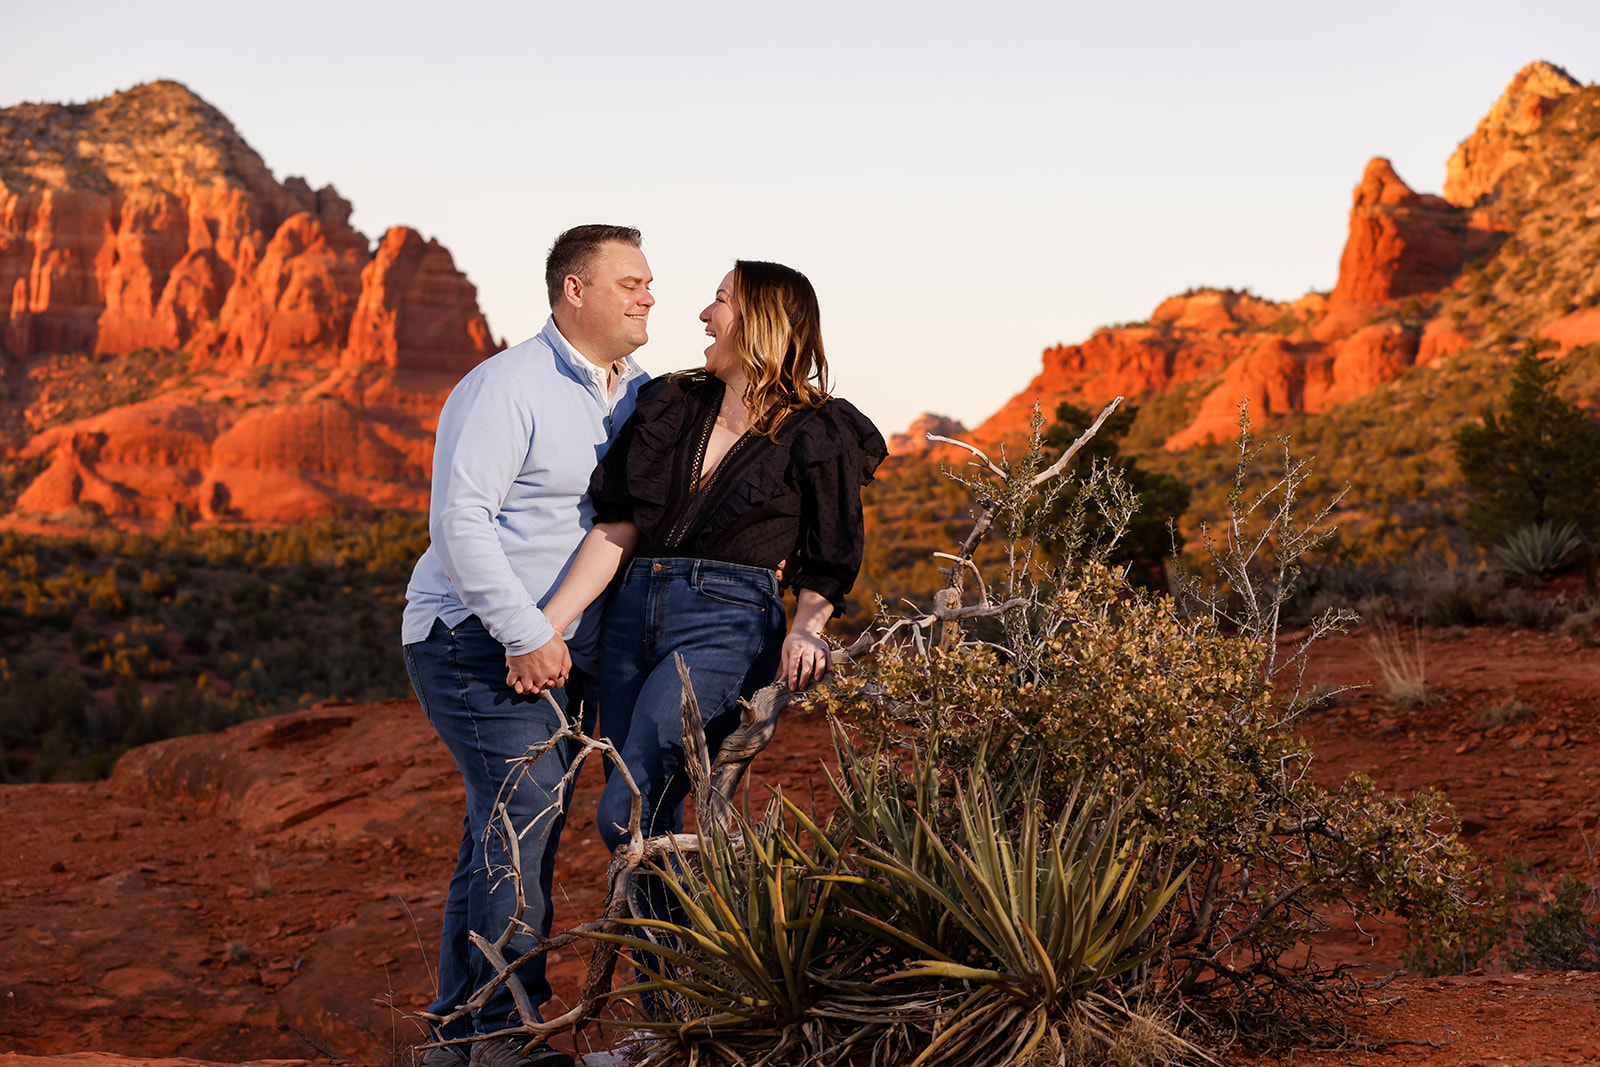 Sedona engagement portrait photographer, classic, fun, natural outdoor photo session in the red rocks of Arizona